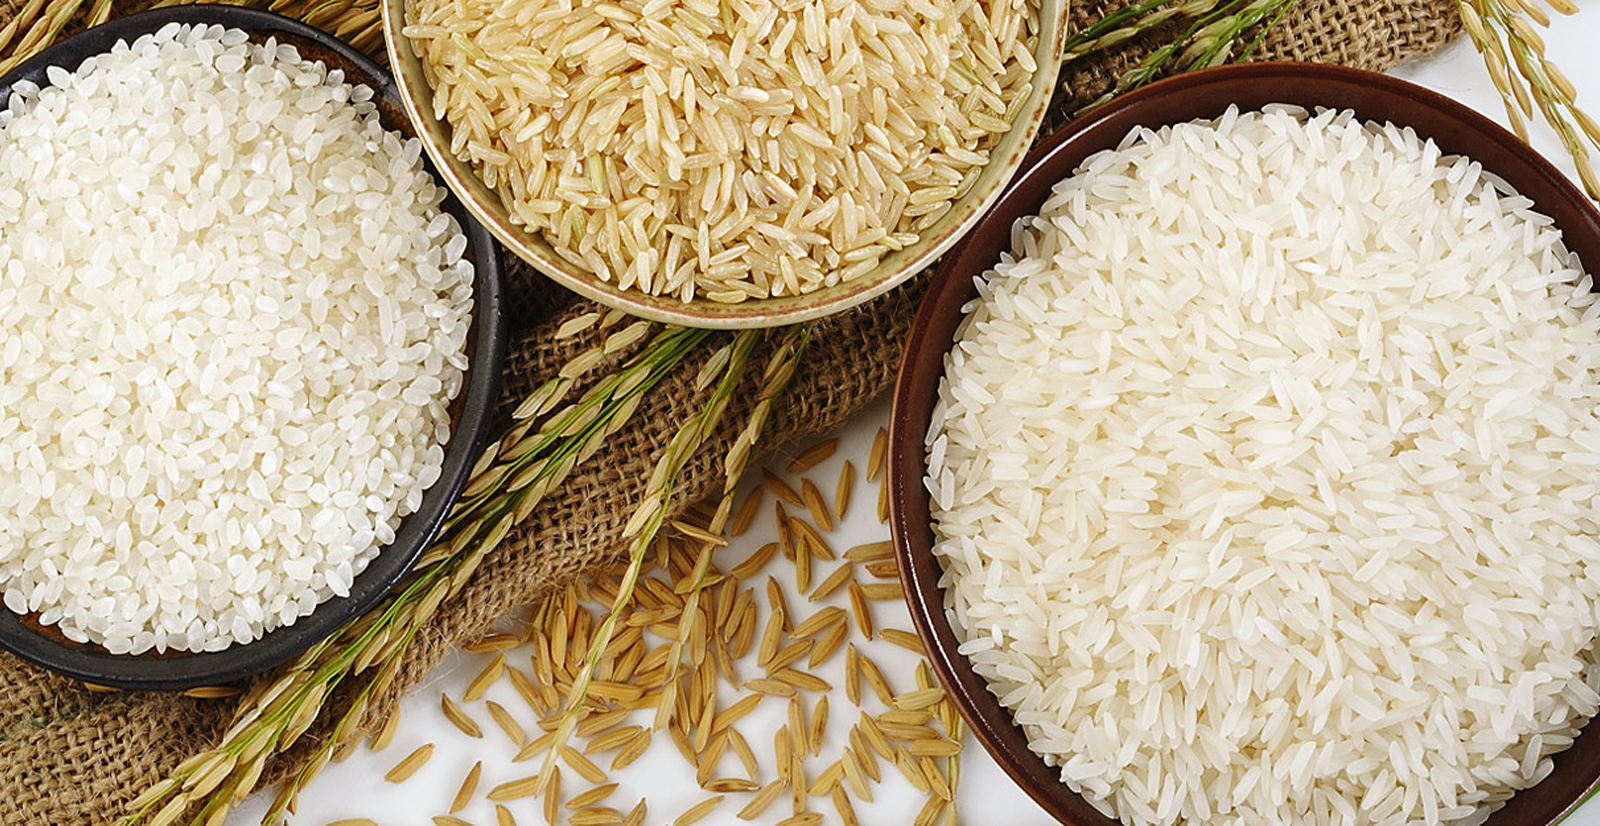 How do I start rice export business in india